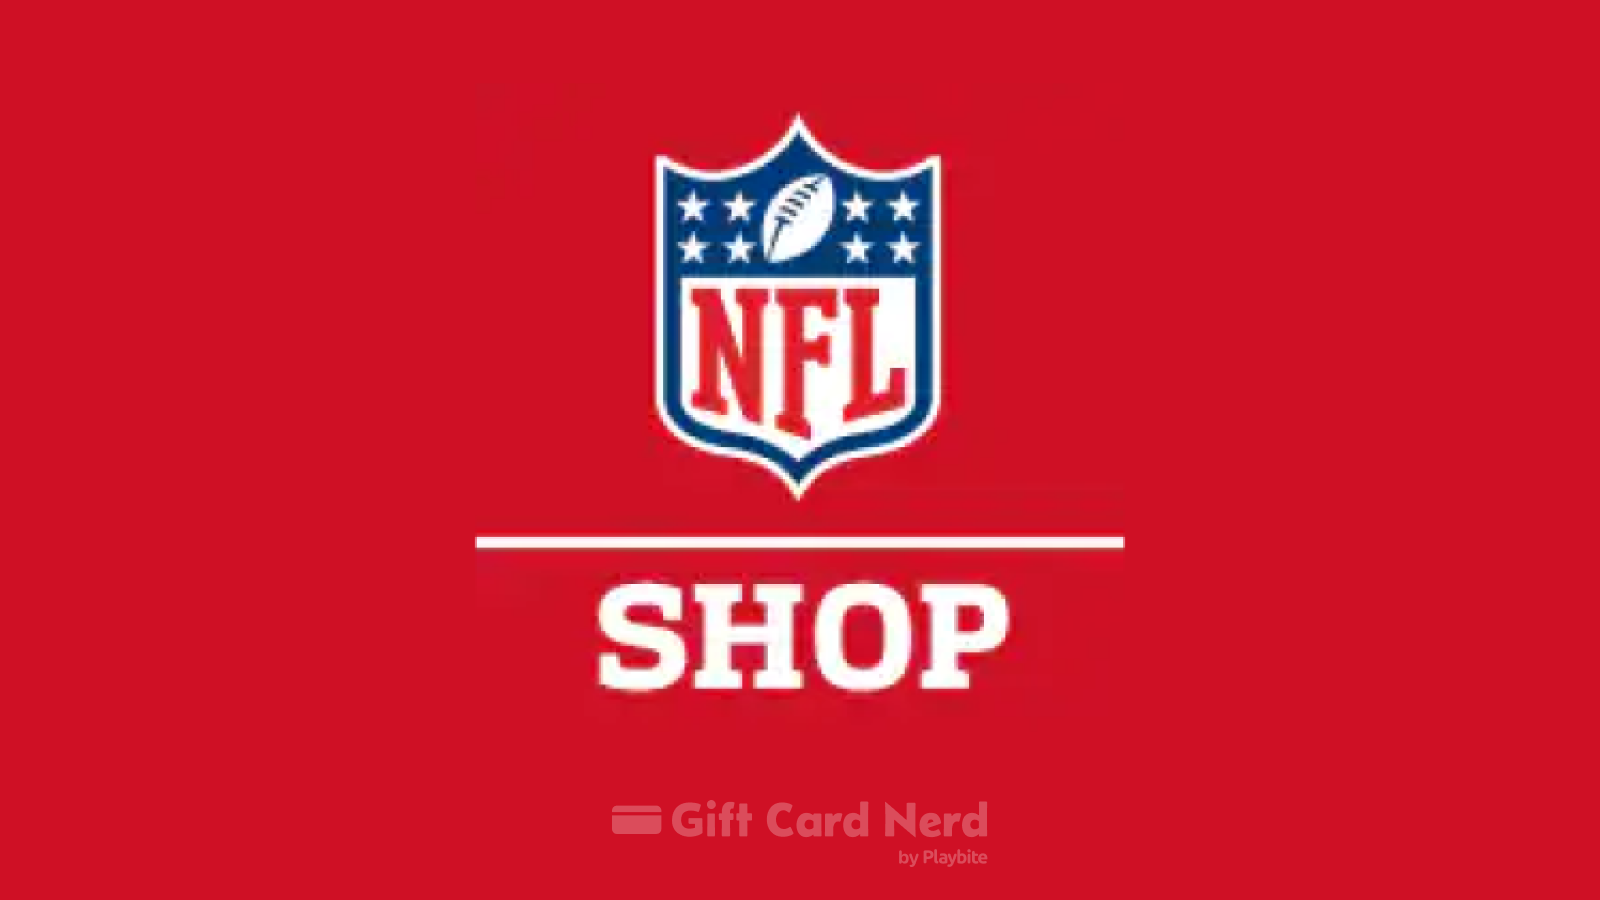 Does Amazon Sell NFL Shop Gift Cards?